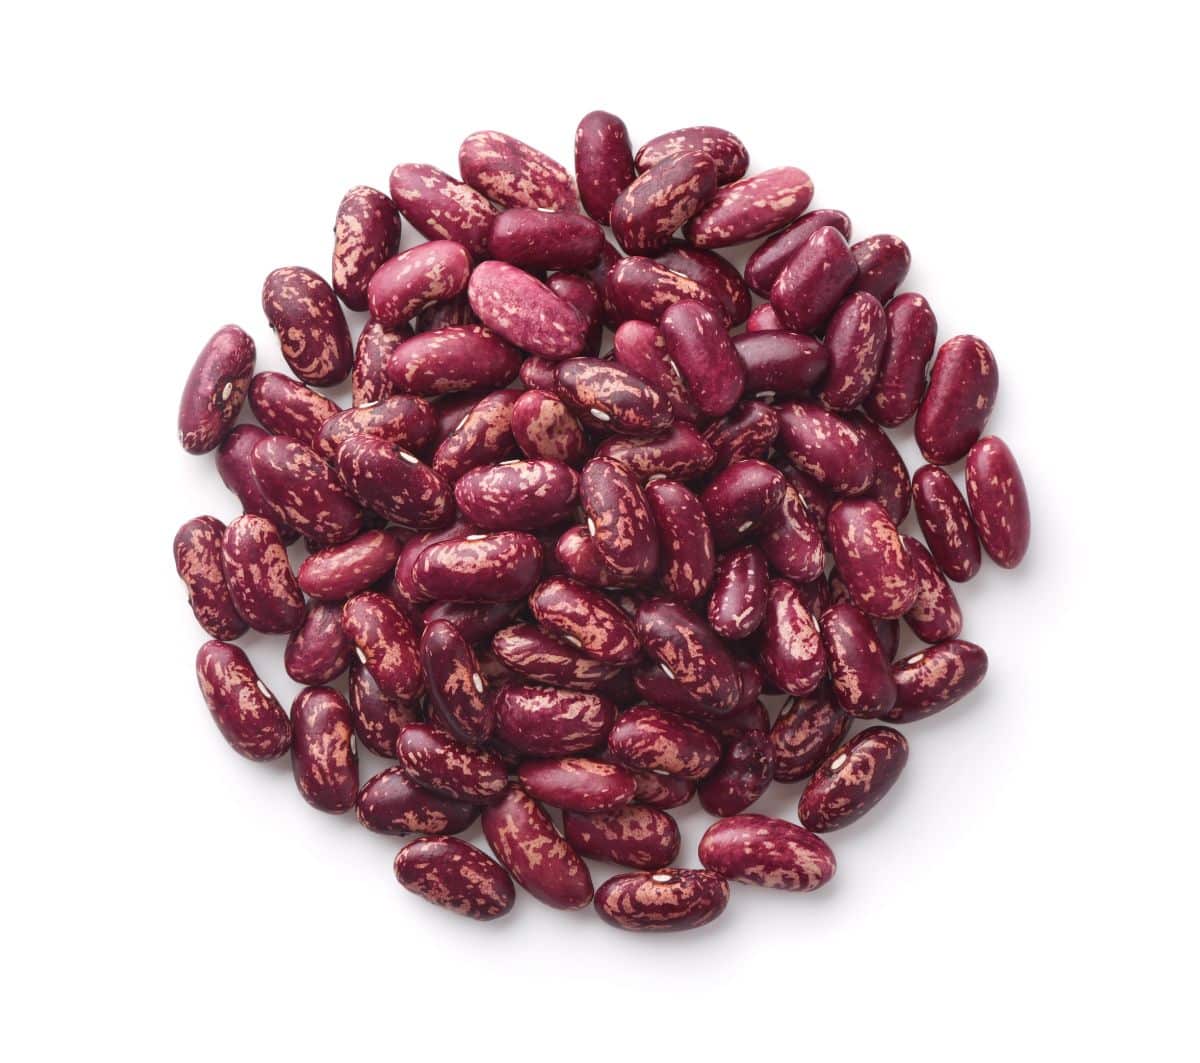 Red and brown King of the Early dried beans